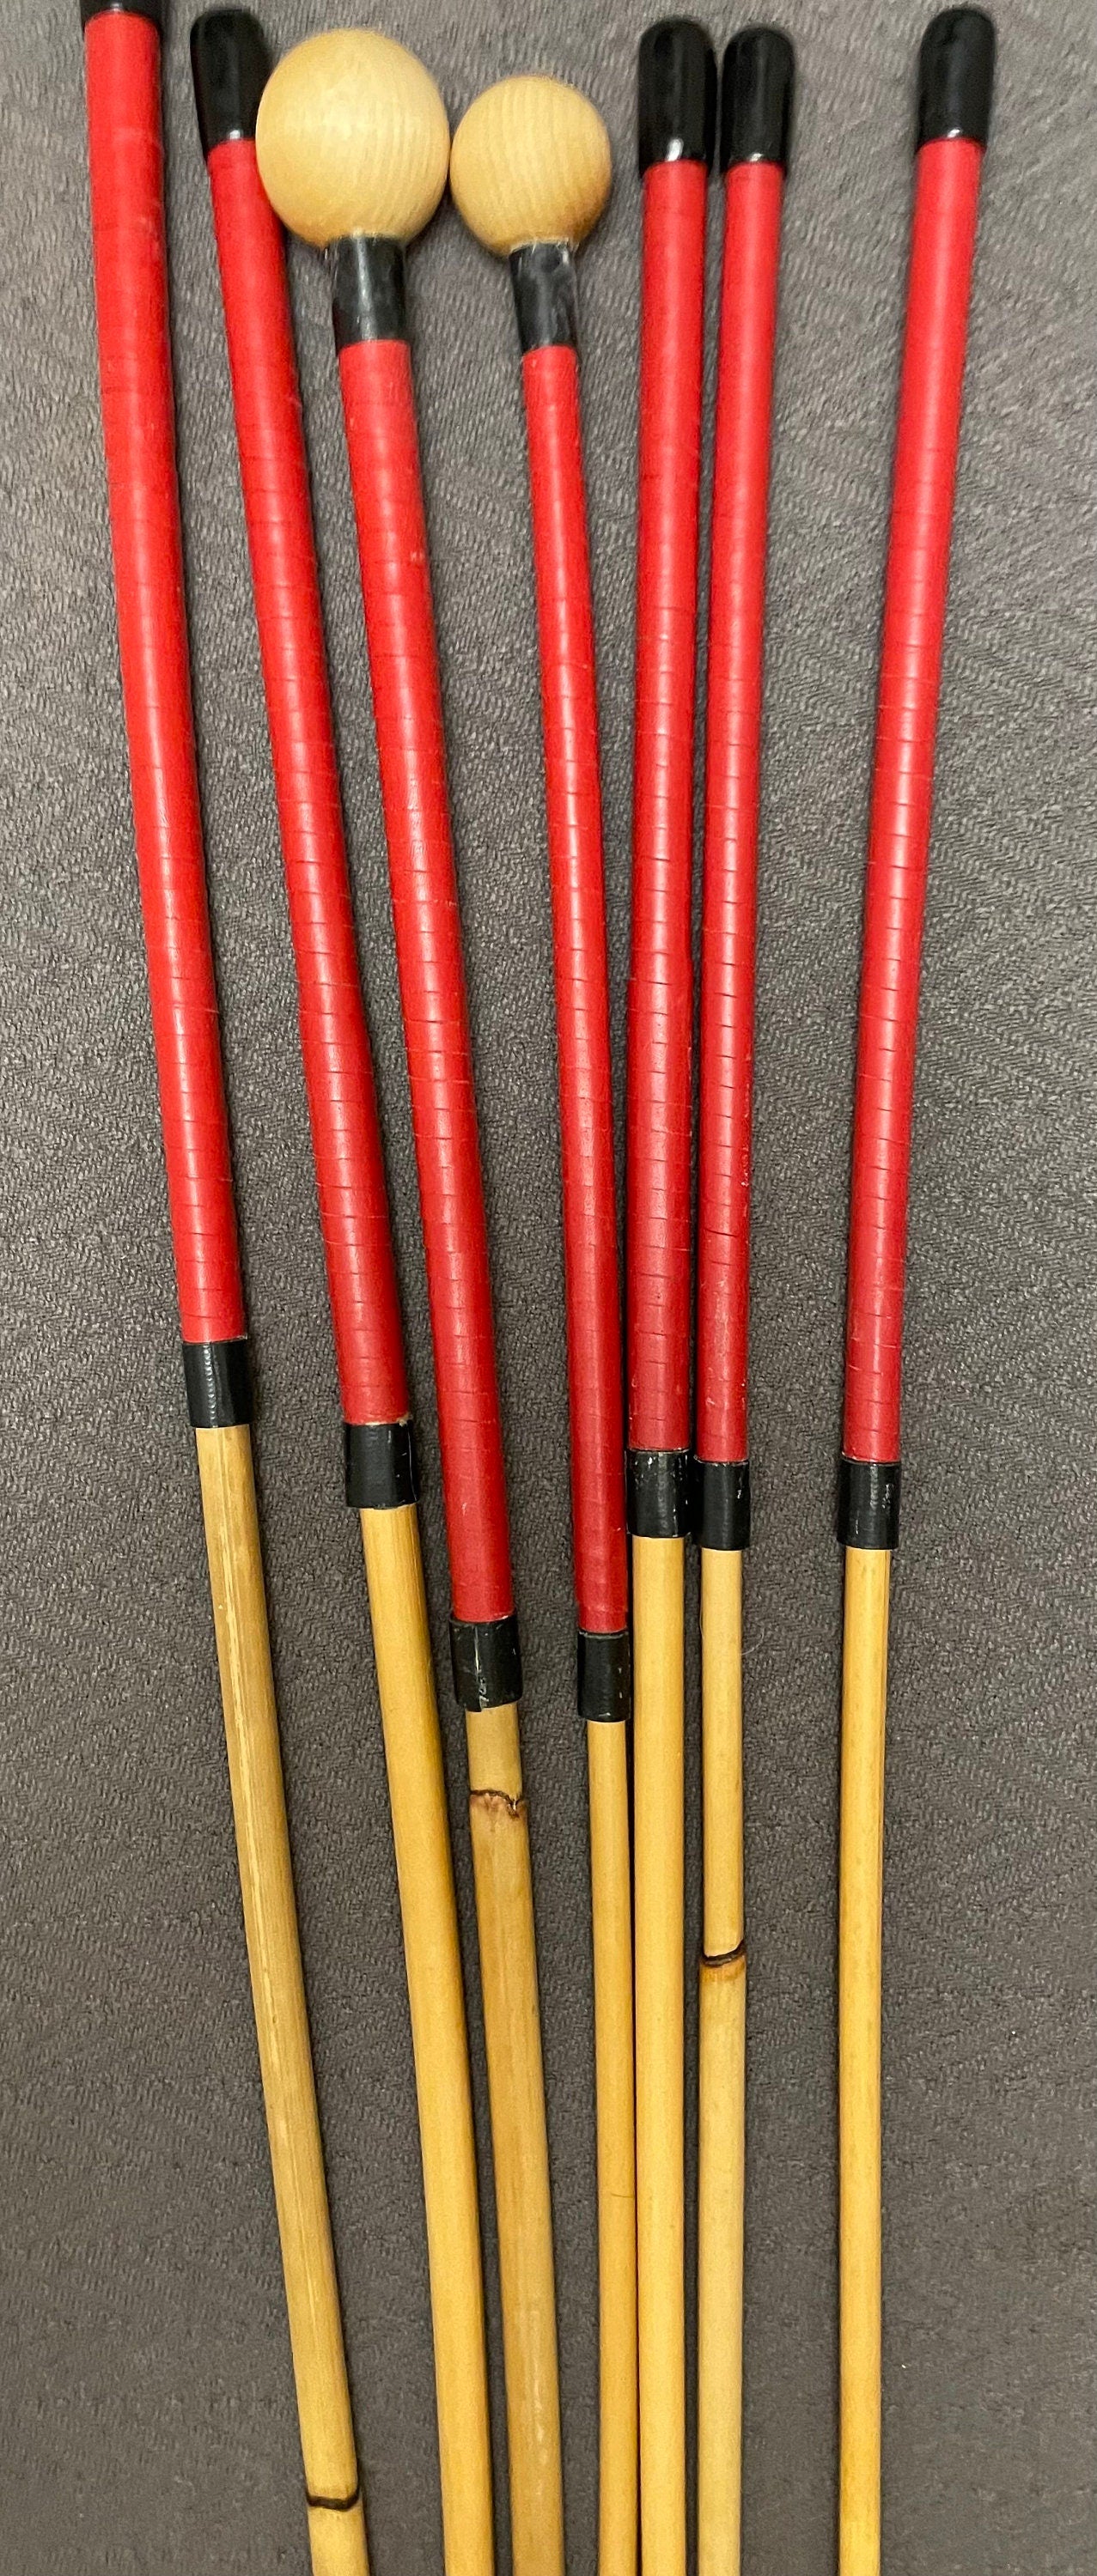 The Professional Punitrix Dungeon Set of 7 Classic Dragon Rattan Punishment Canes / School Canes / BDSM Canes - RED Roo Leather Handles